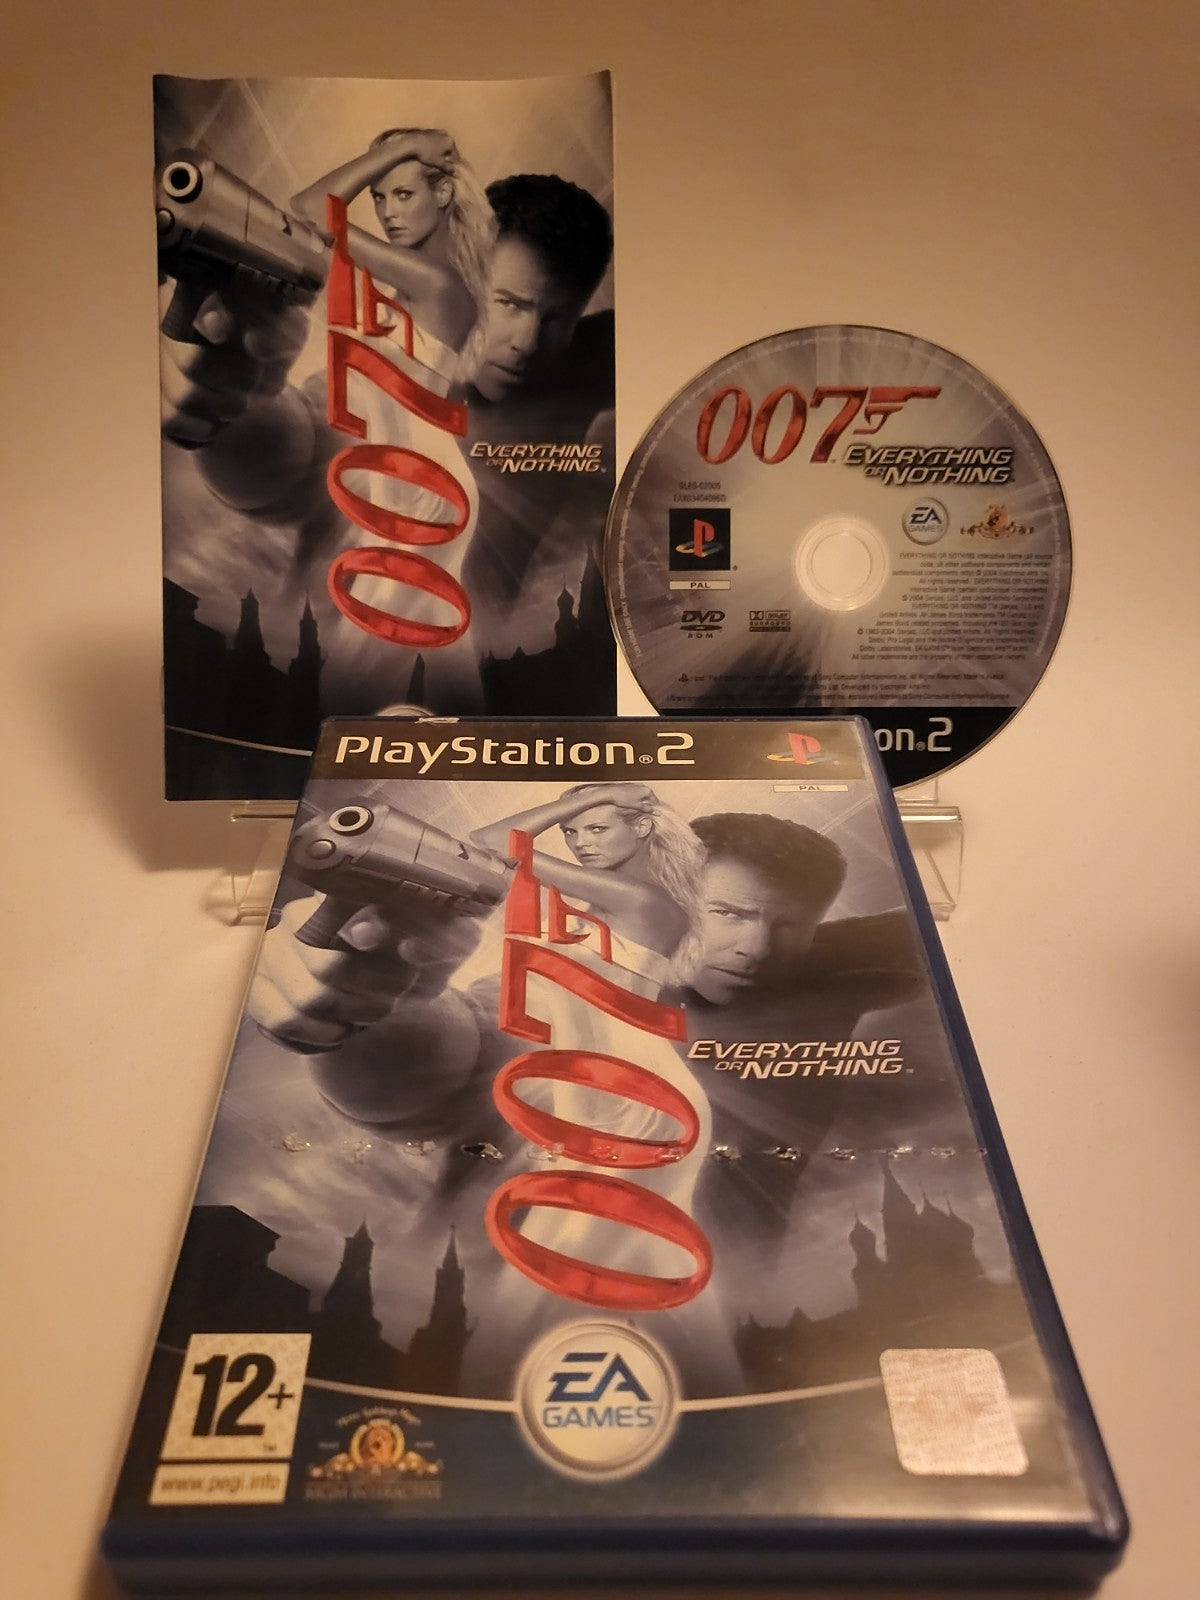 James Bond 007 Everything or Nothing Playstation 2